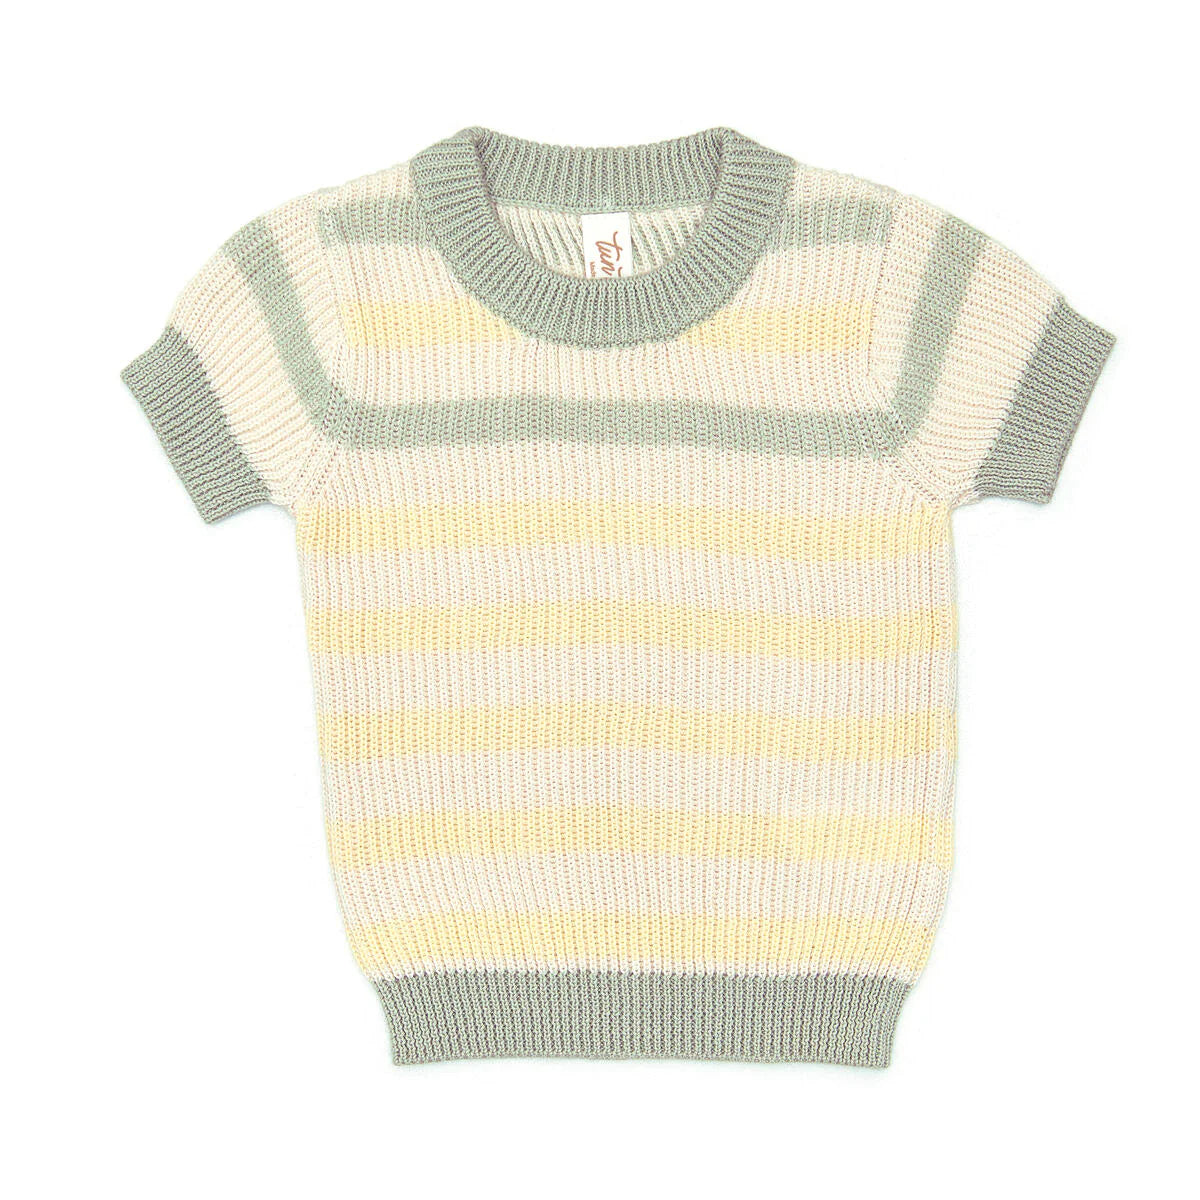 Tun Tun Stripe Knitted Top & Suspender Short Outfit